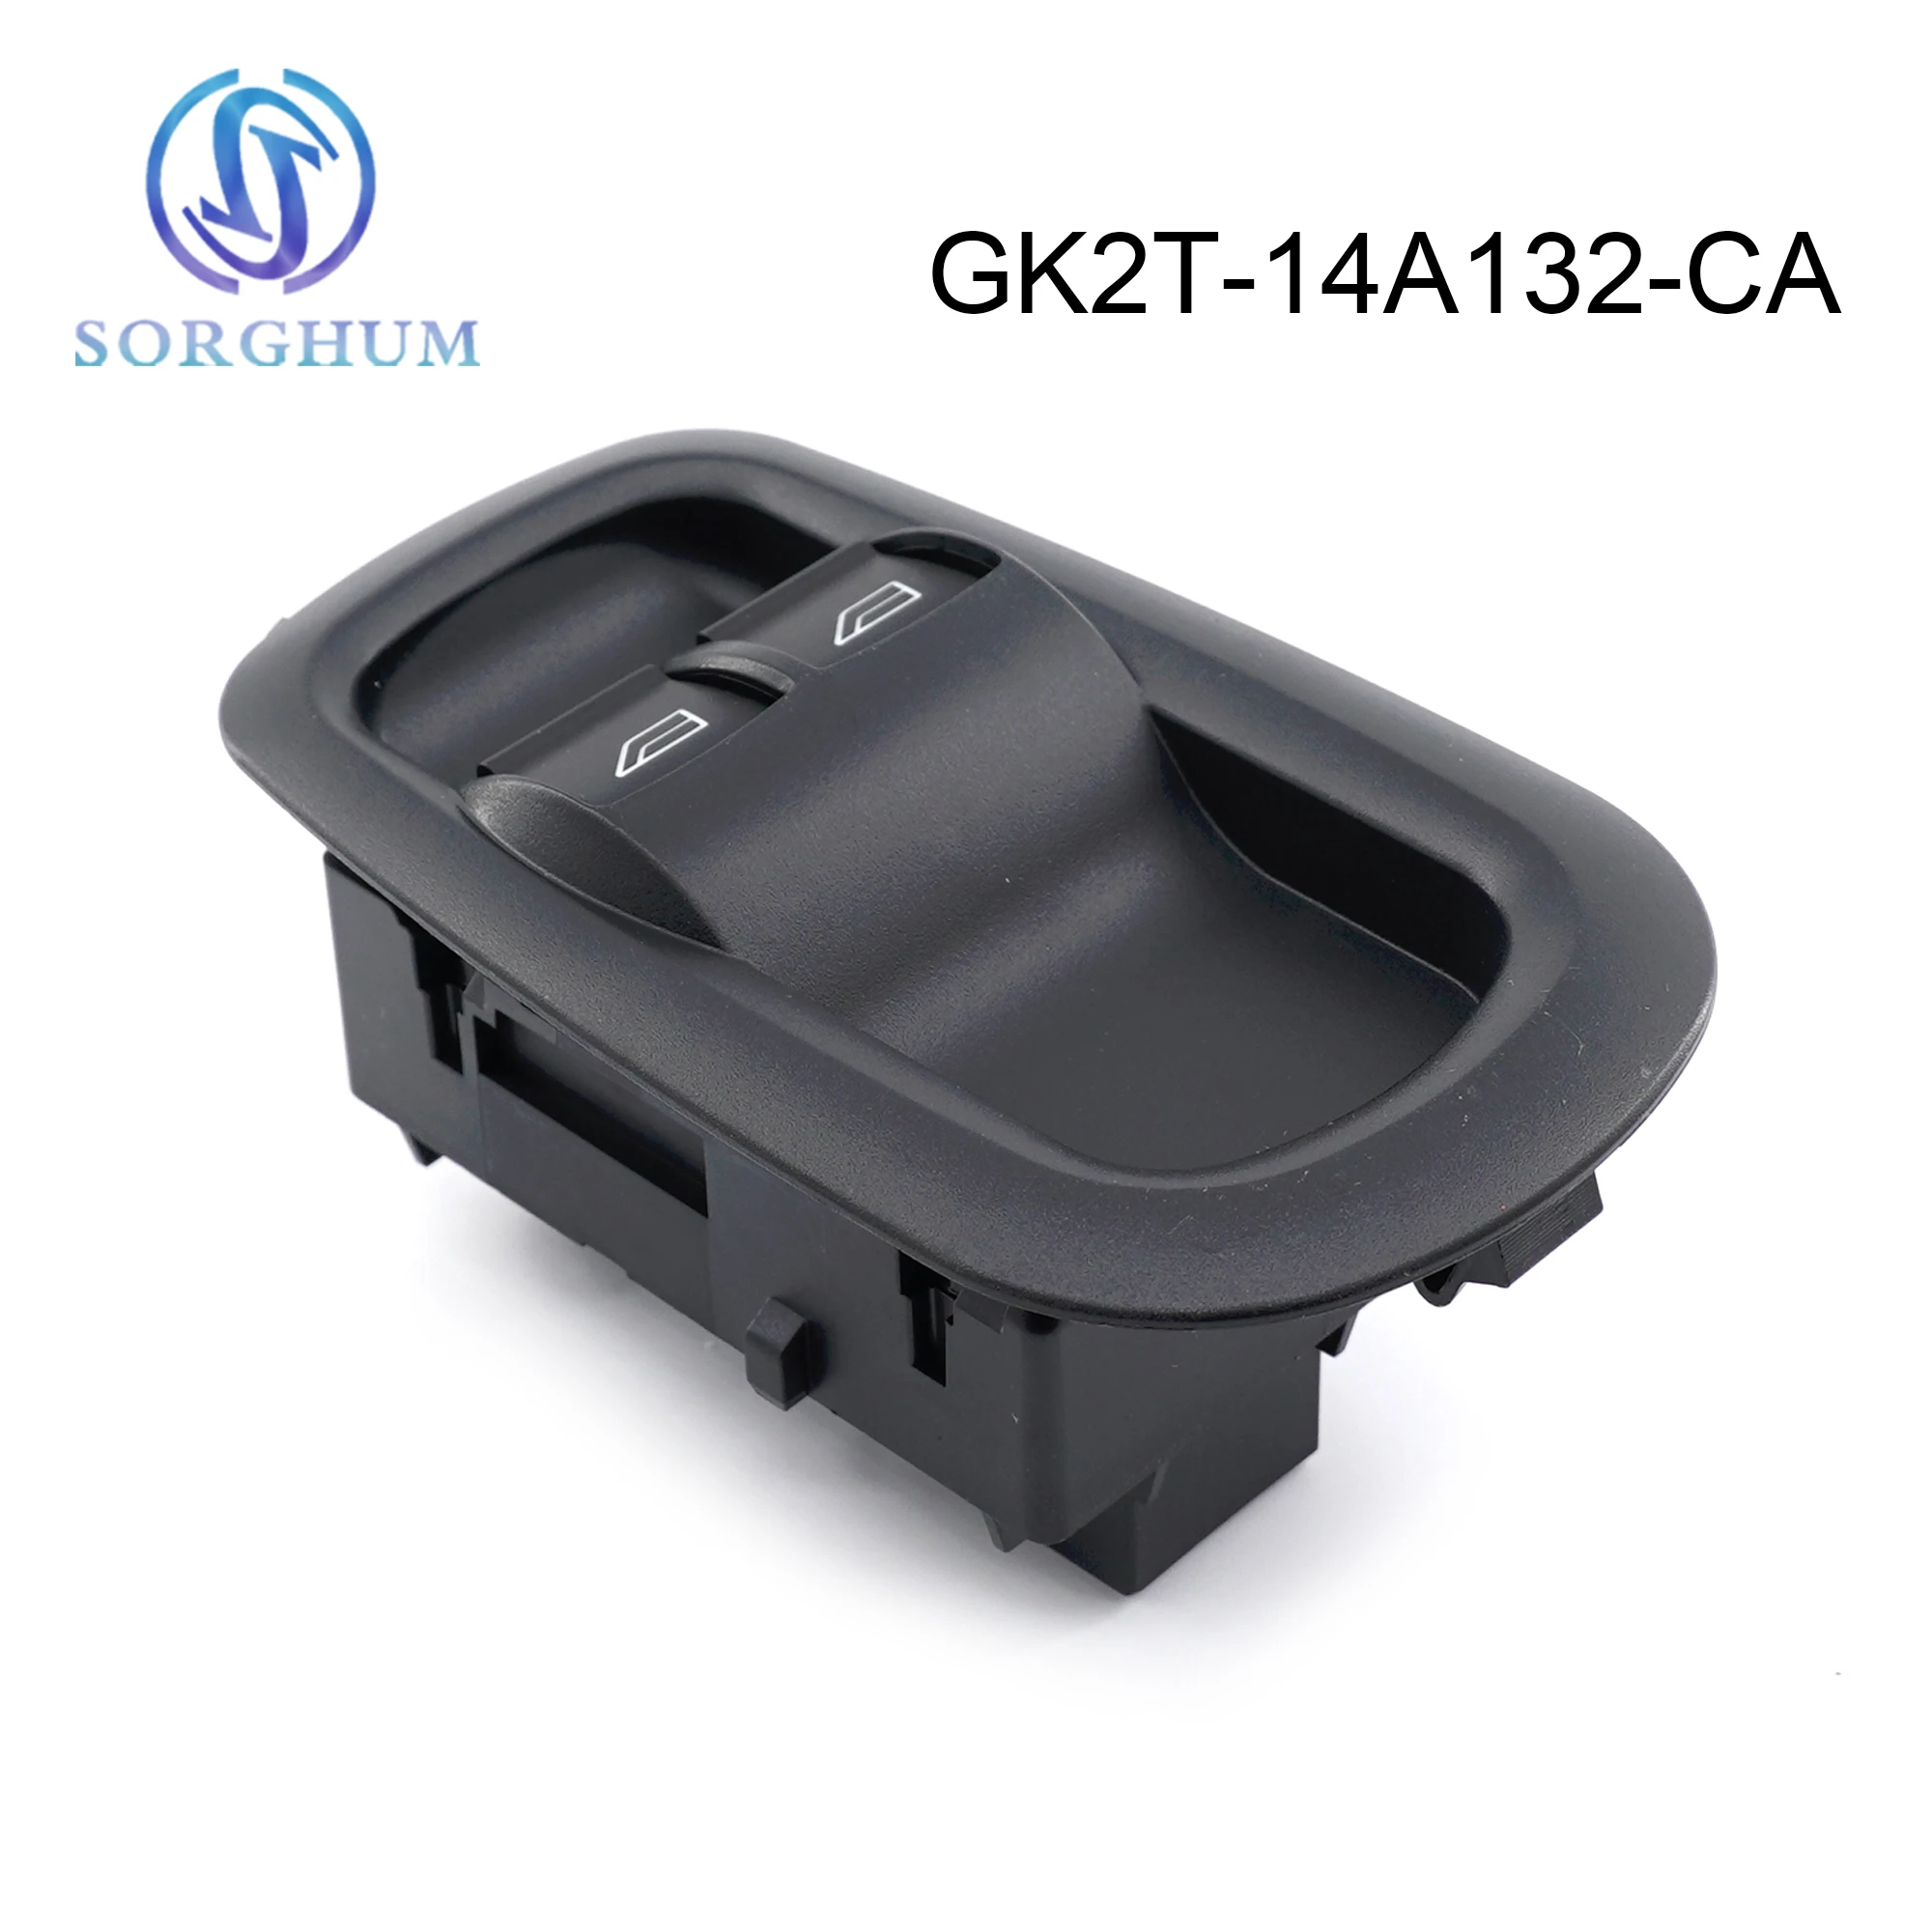 Sorghum GK2T-14A132-CA GK2T14A132CA Power Master Window Lifter Control Switch For Ford Transit MK8 2014-2020 Custom 2012-2020